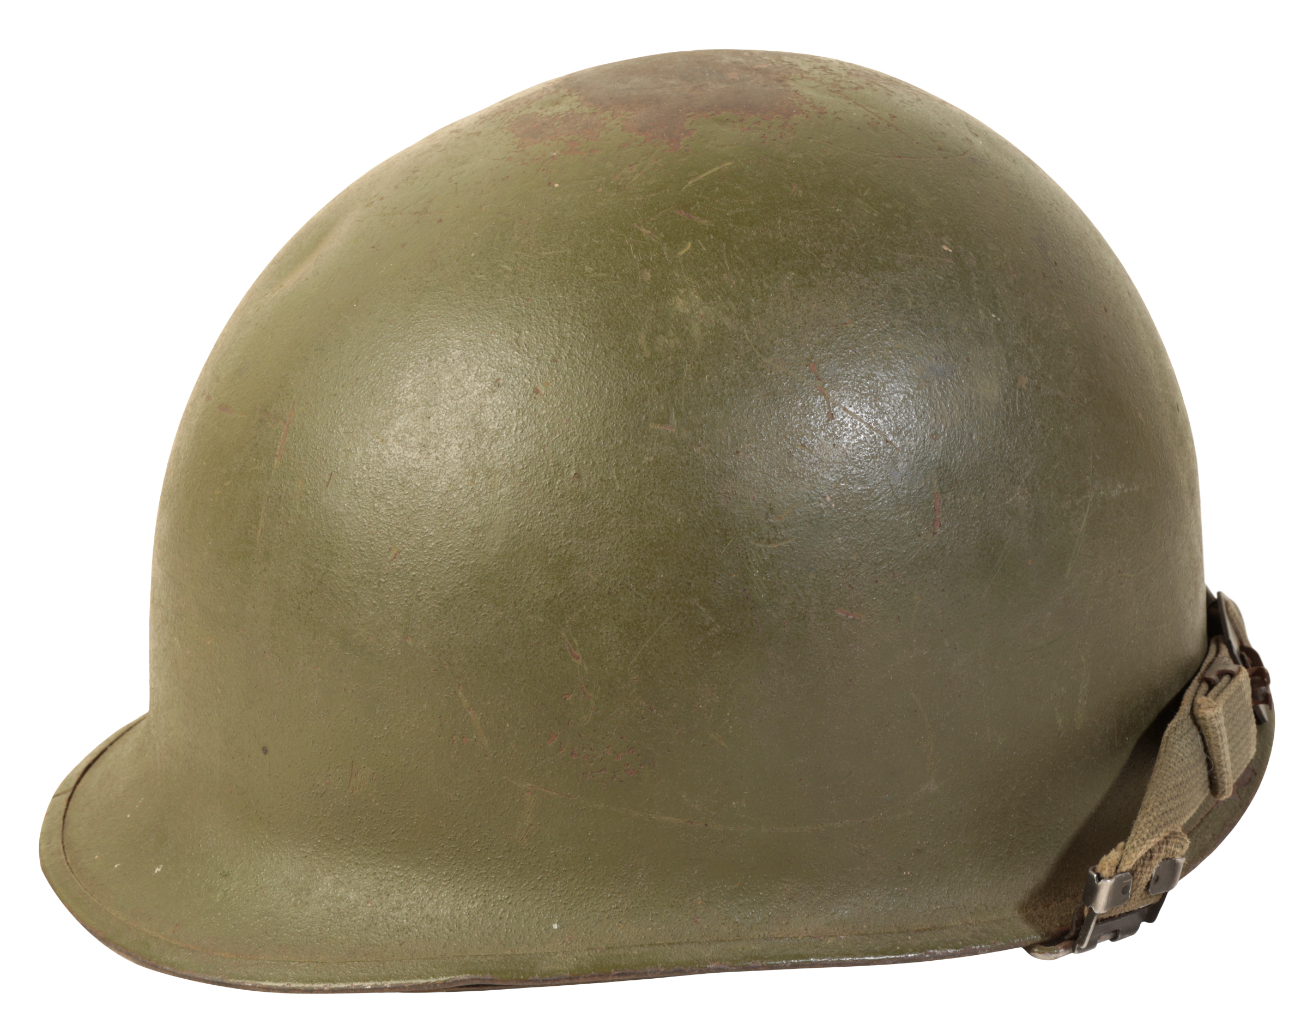 A WWII AMERICAN M1 HELMET with